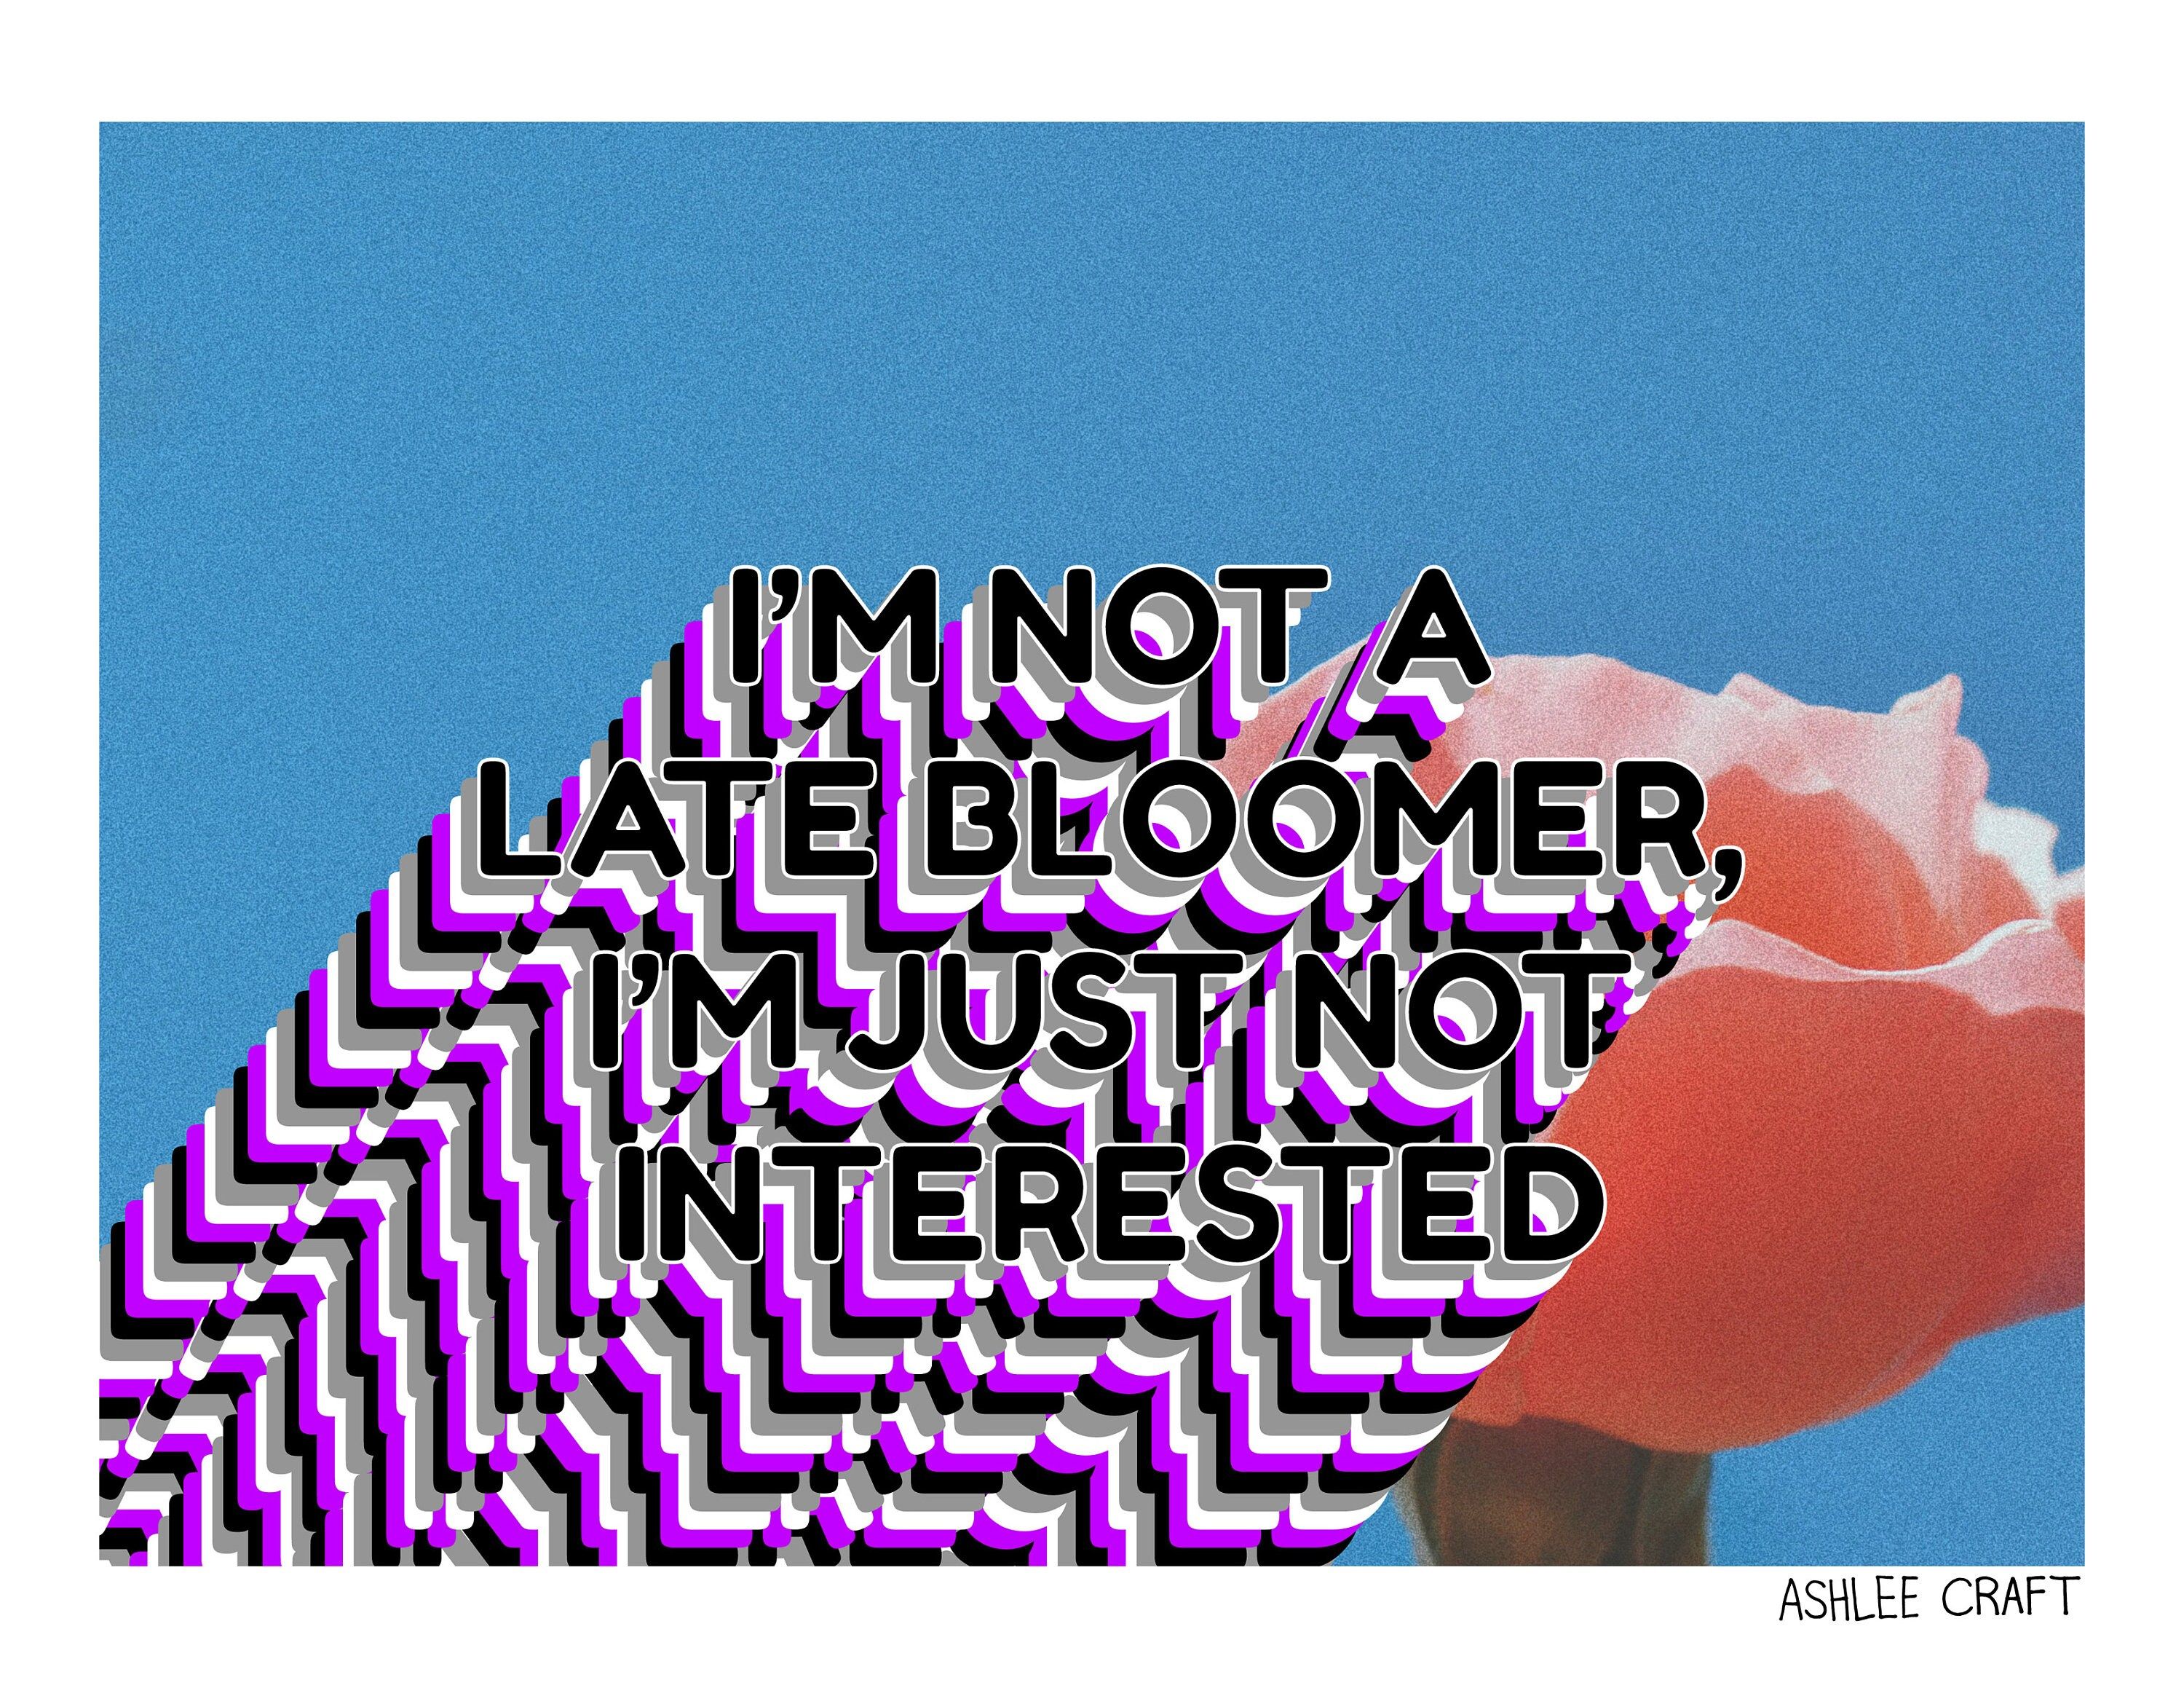 I'm Not a Late Bloomer I'm Just Not Interested